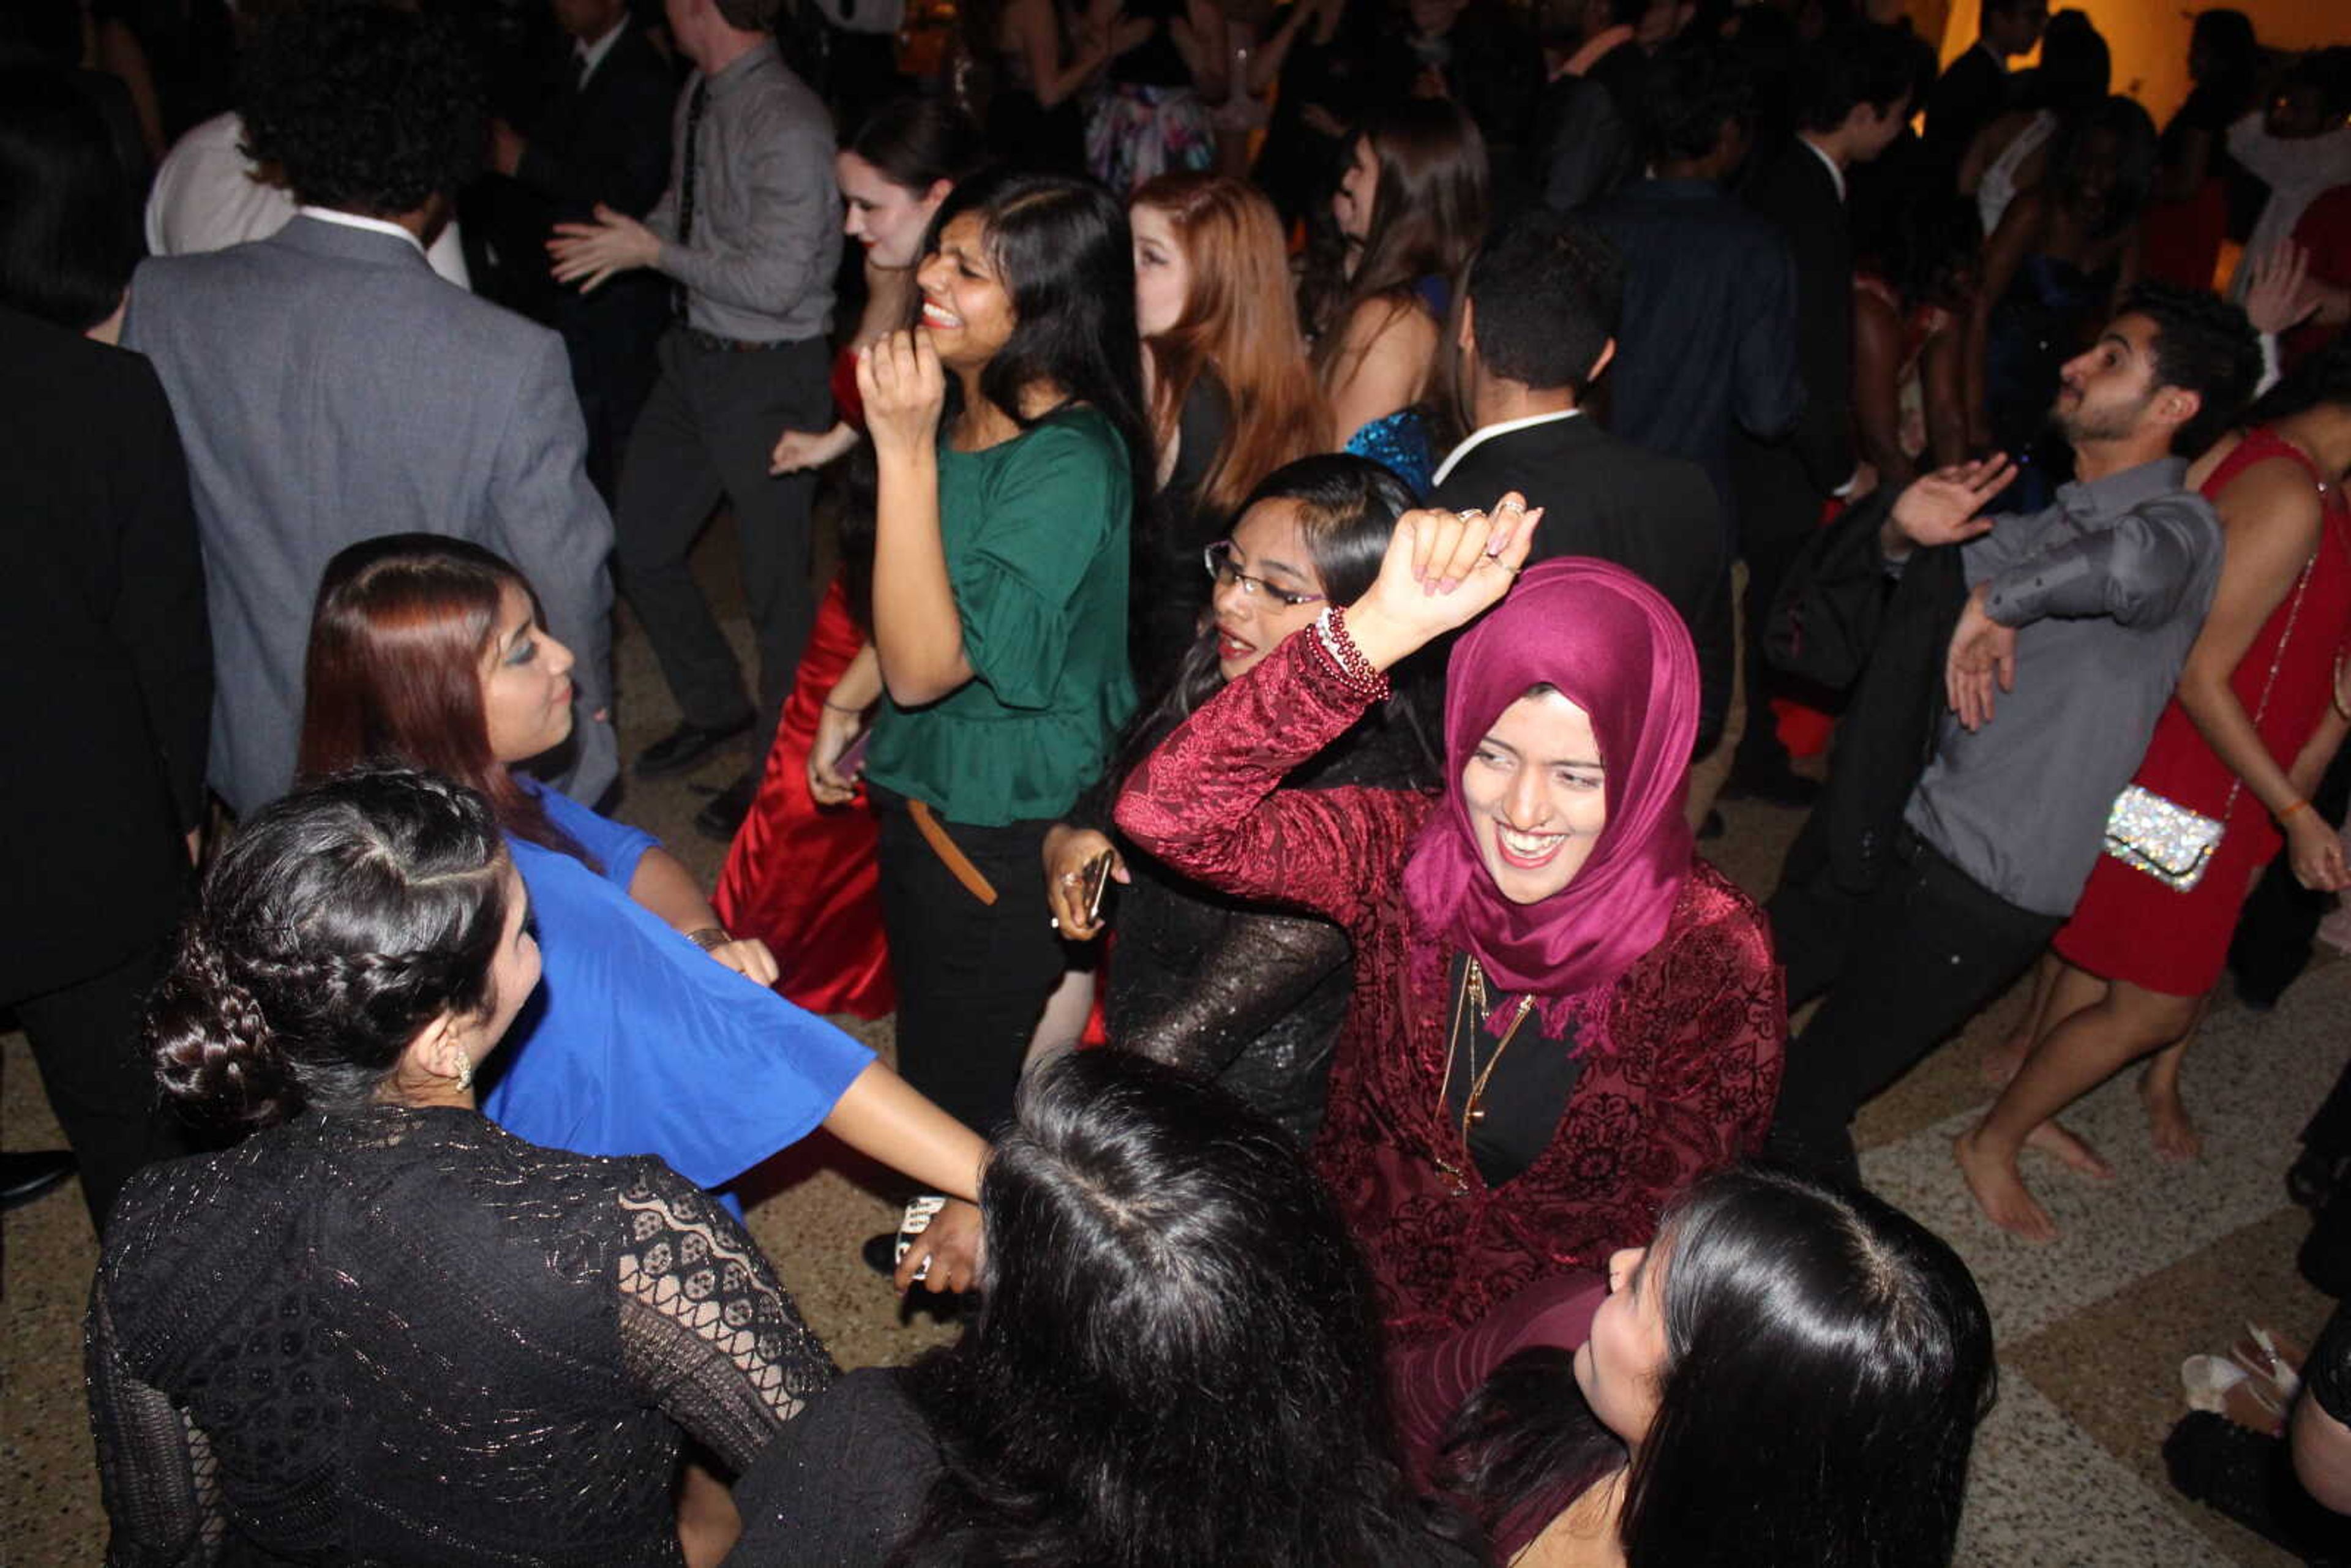 ISA hosts 200 people for annual masquerade prom